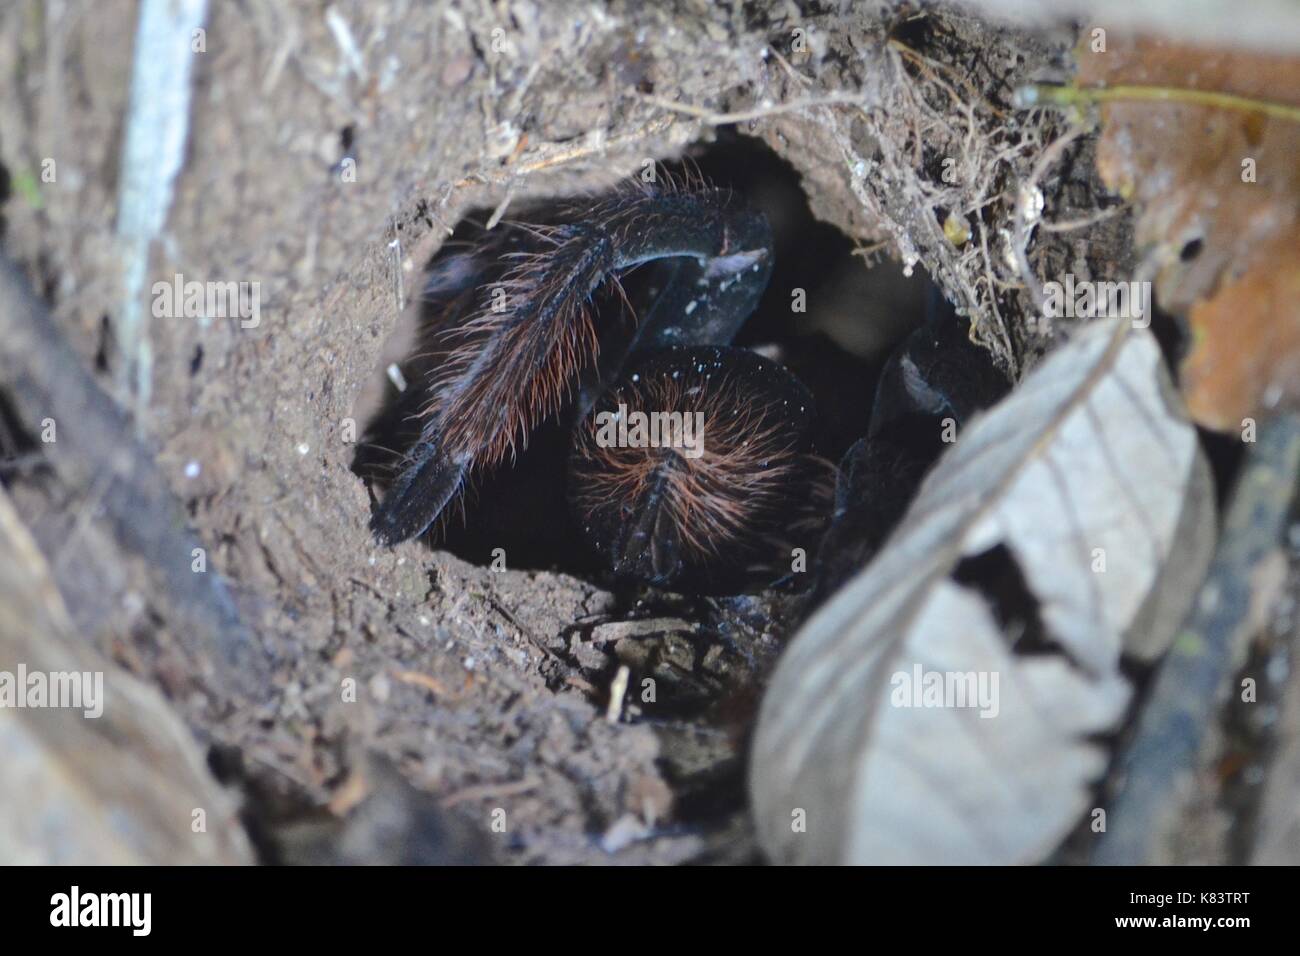 A Tarantula spider comes out of its nesting hole in the Amazon rainforest Stock Photo